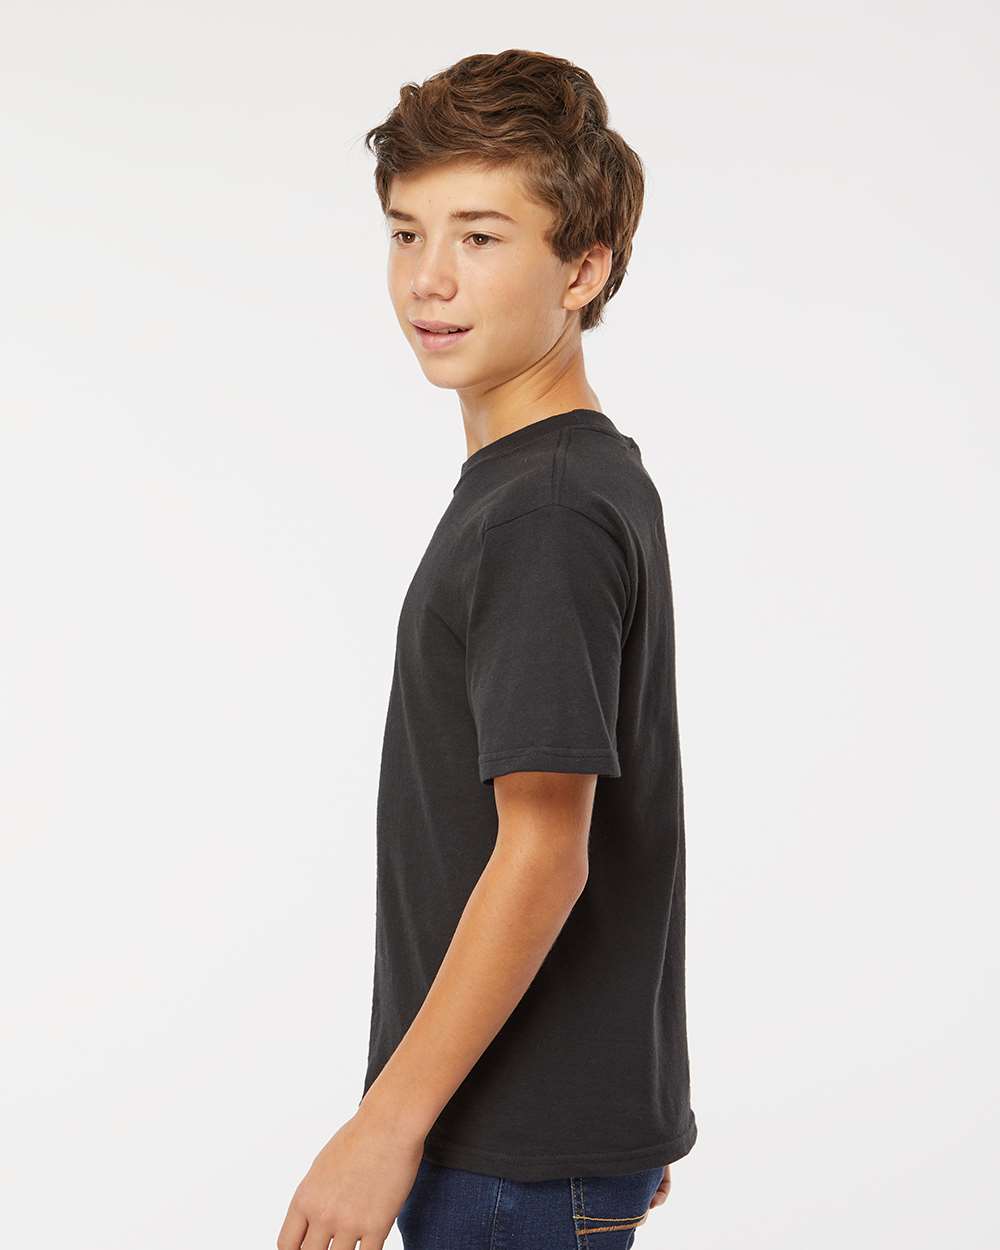 M&O Youth Gold Soft Touch T-Shirt 4850 #colormdl_Black